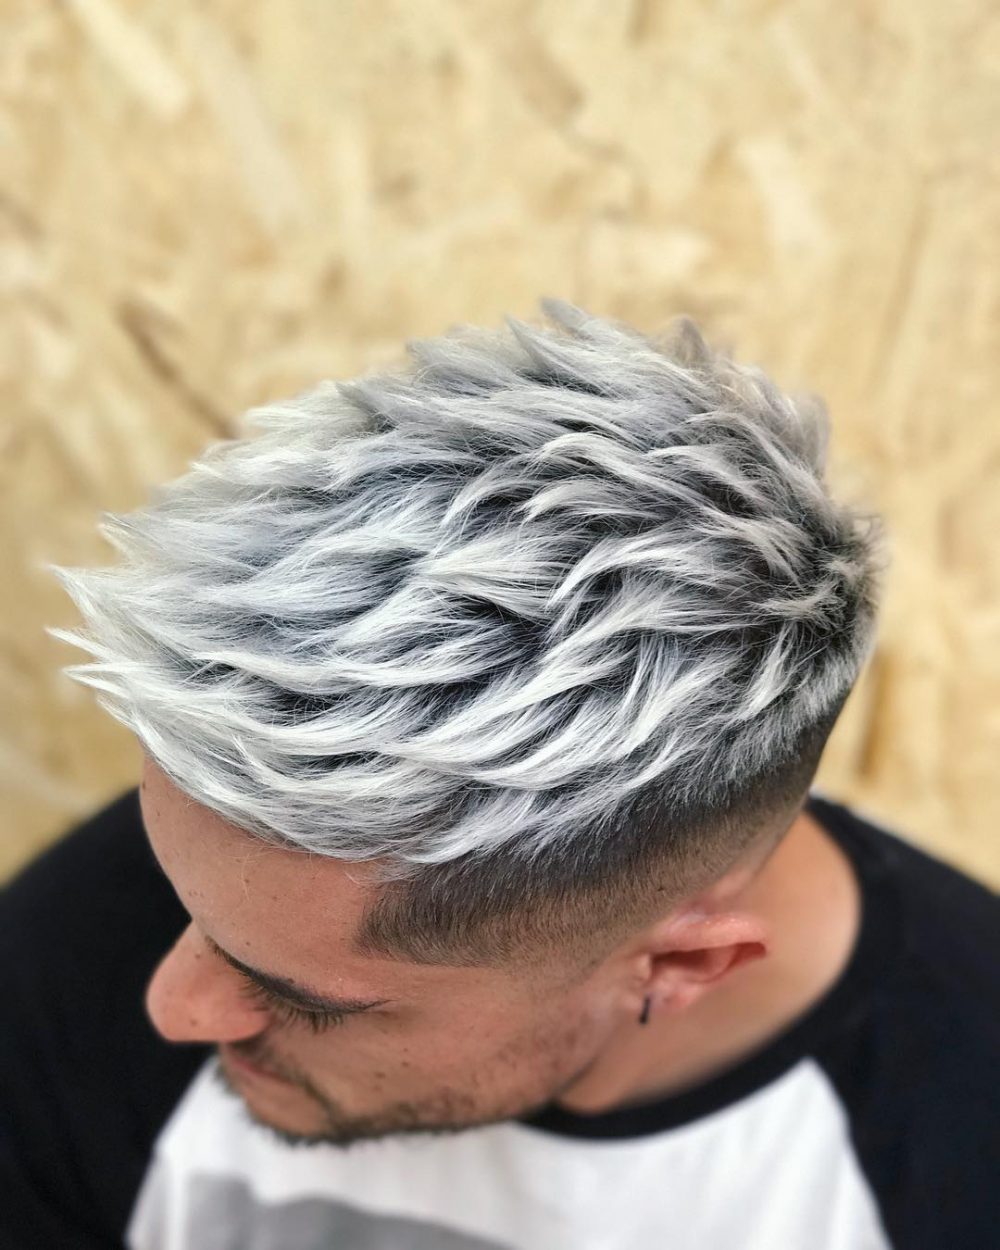 Hair Color for Men 34 Examples Ranging from Vivids to Natural Hues